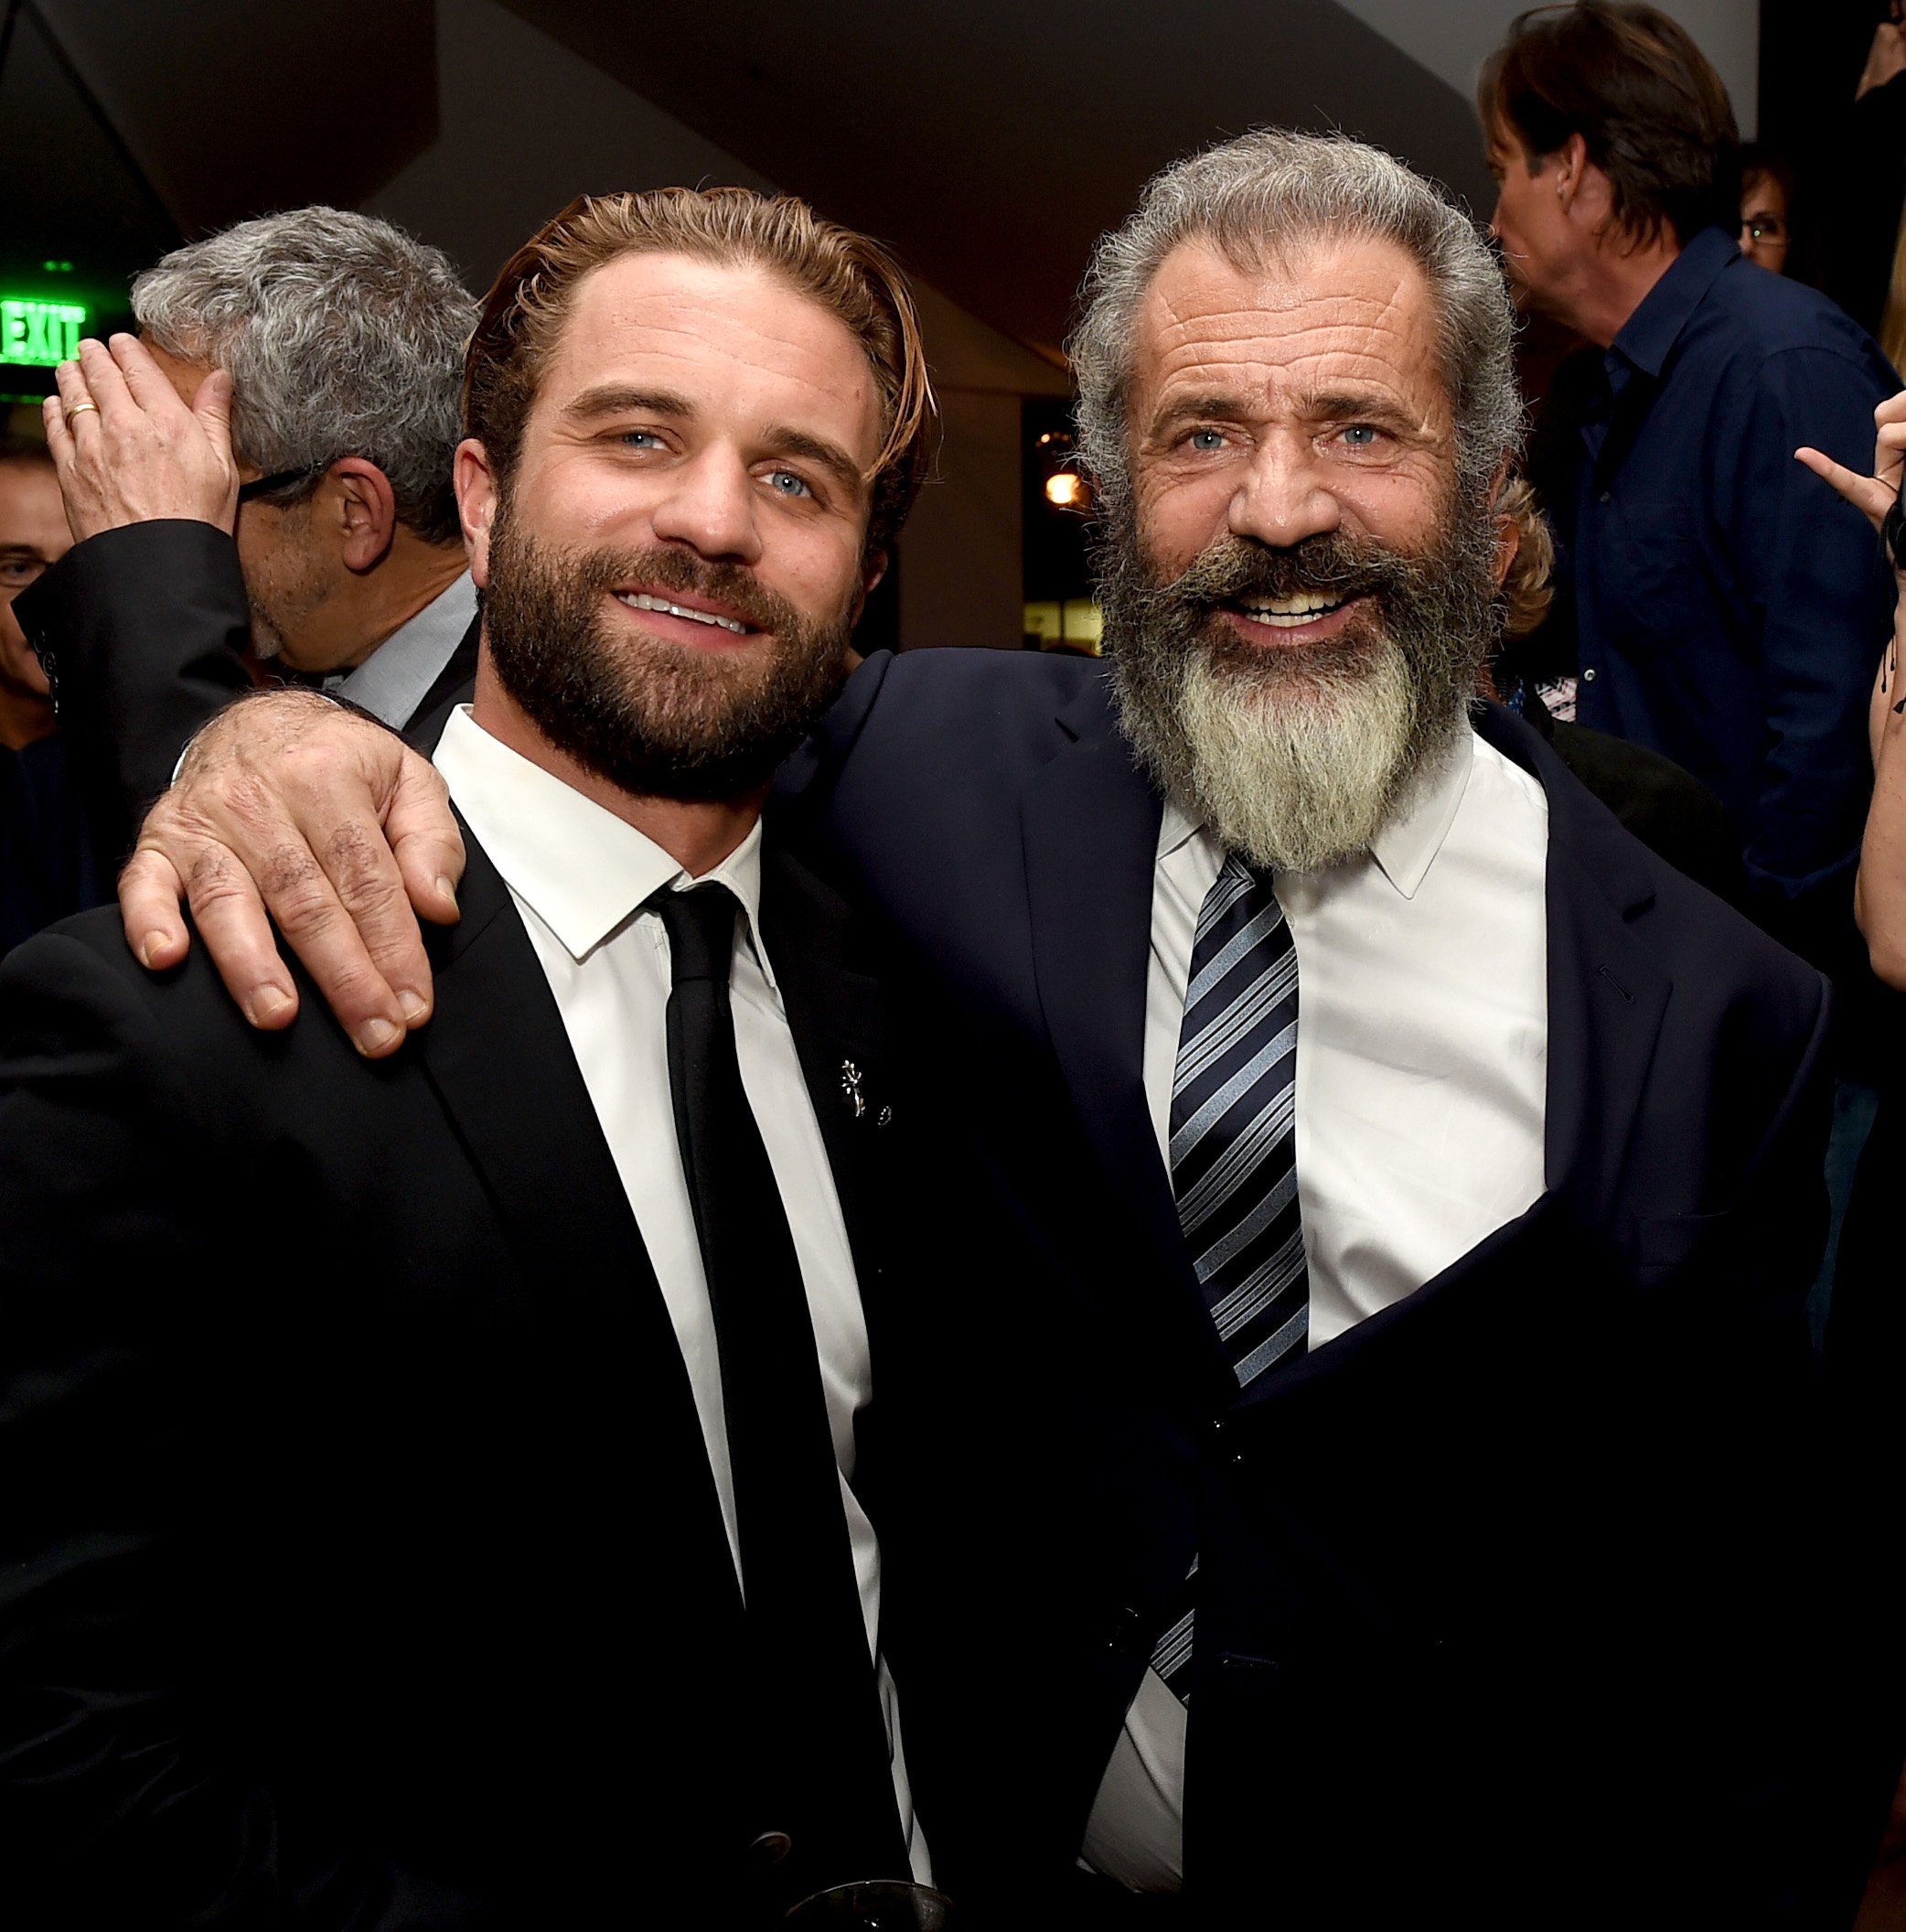 Mel Gibson (R) and his son actor Milo Gibson pose at the after party for a screening of Summit Entertainment's "Hacksaw Ridge" at the Academy of Motion Picture Arts and Sciences on October 24, 2016 in Beverly Hills, California | Source: Getty Images 